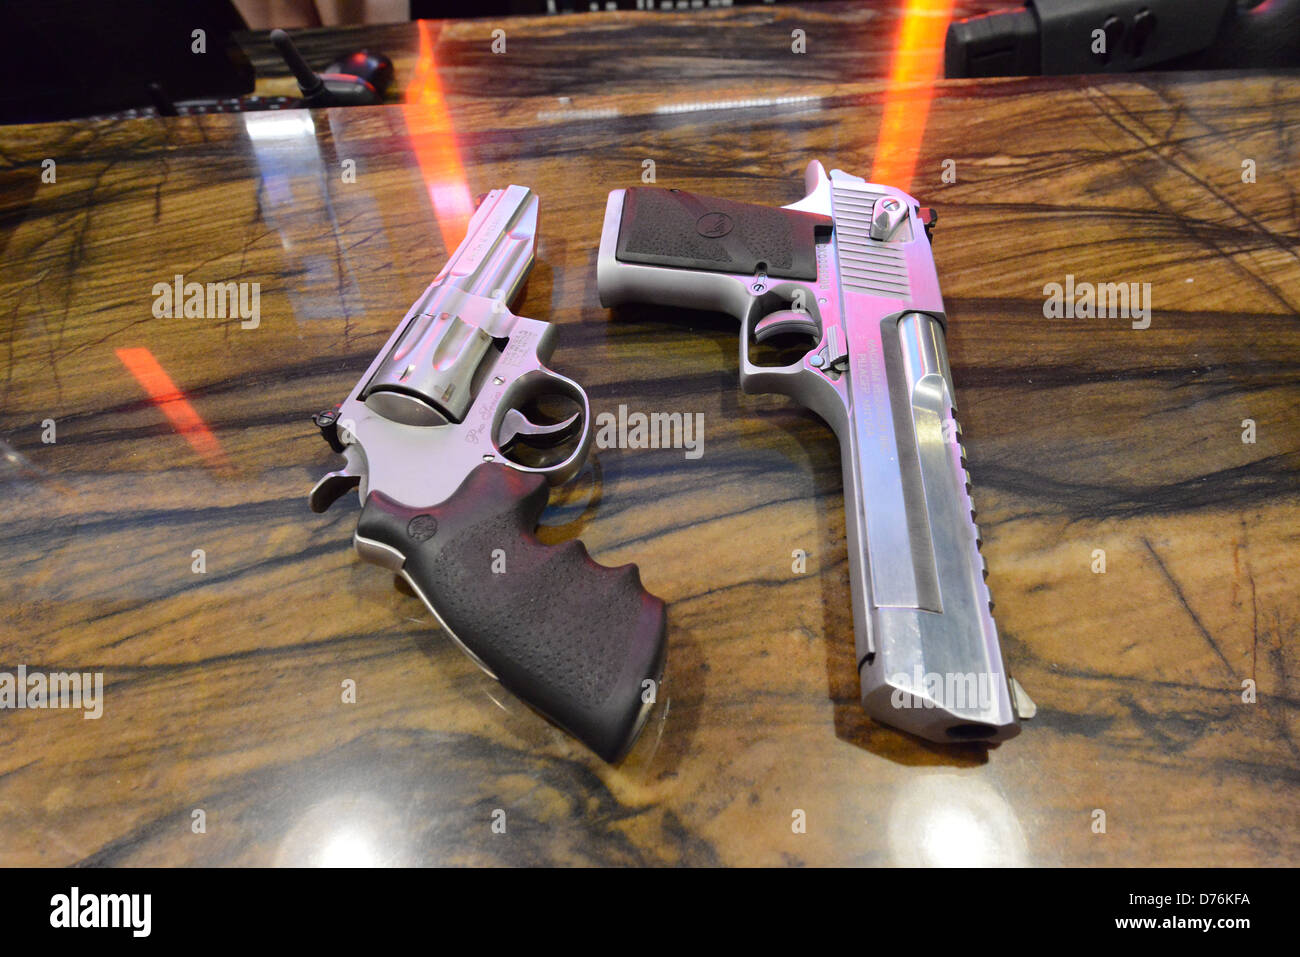 A revolver and an automatic pistol. Stock Photo